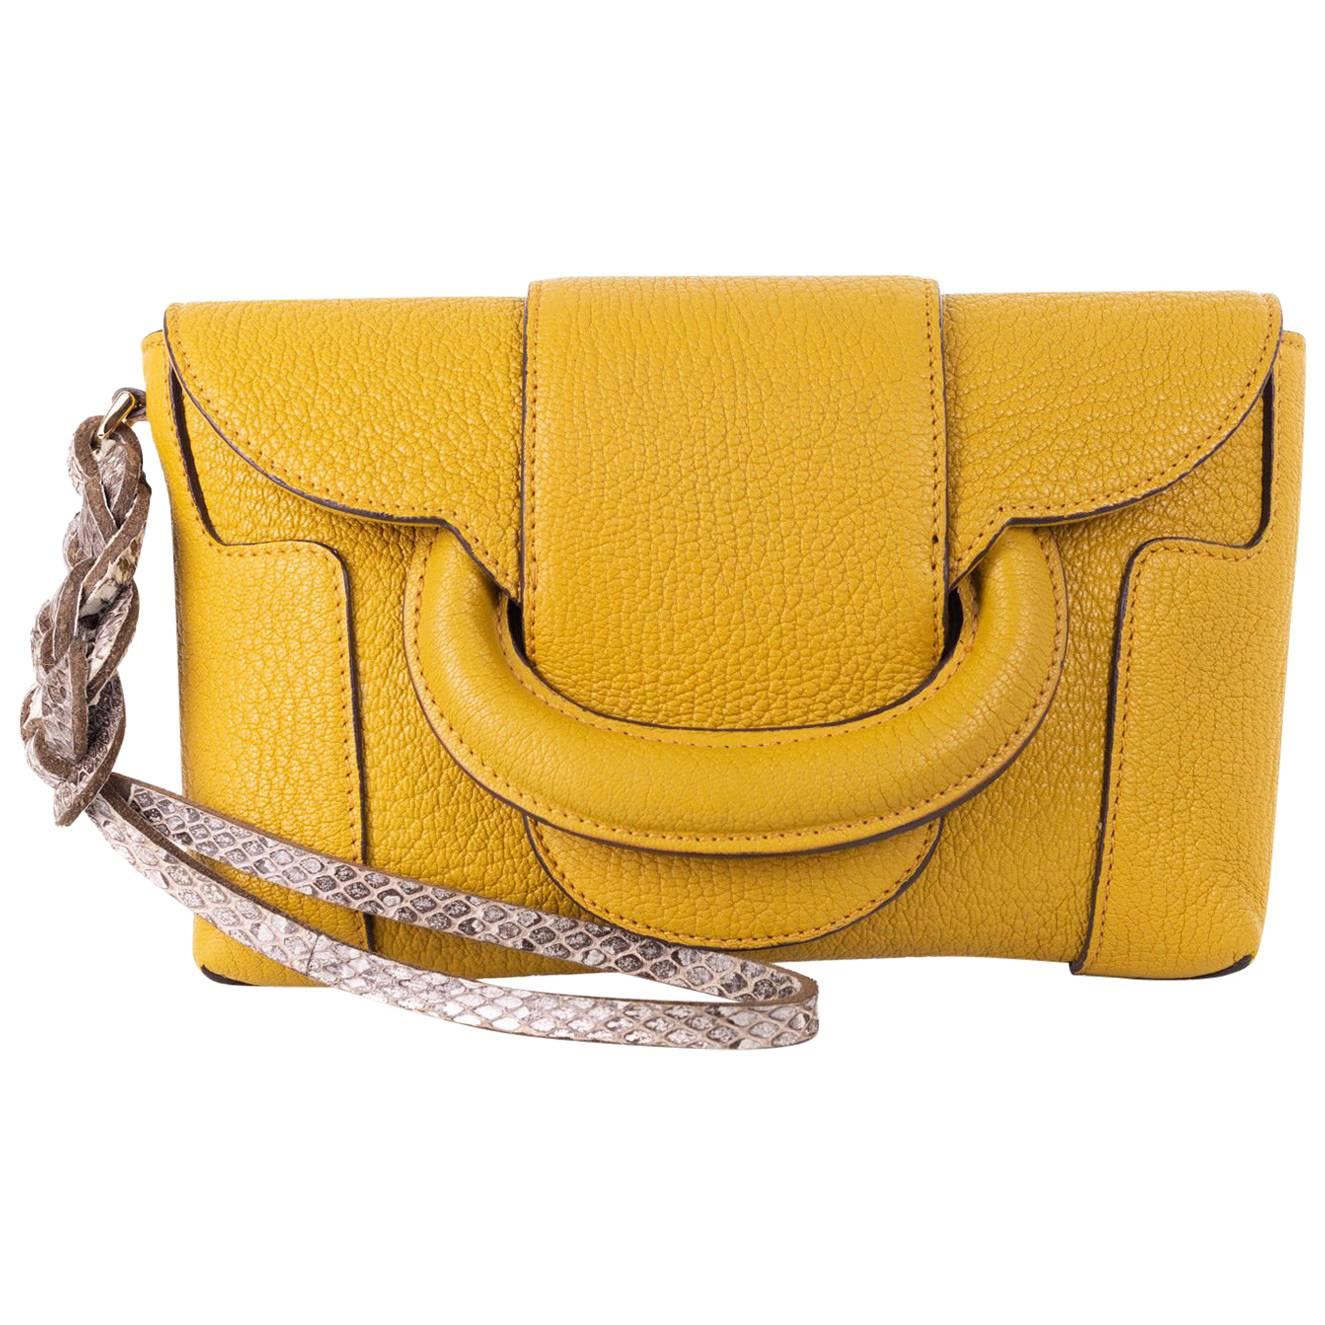 Roberto Cavalli Solid Mustard Yellow Grained Leather Wristlet Clutch For Sale